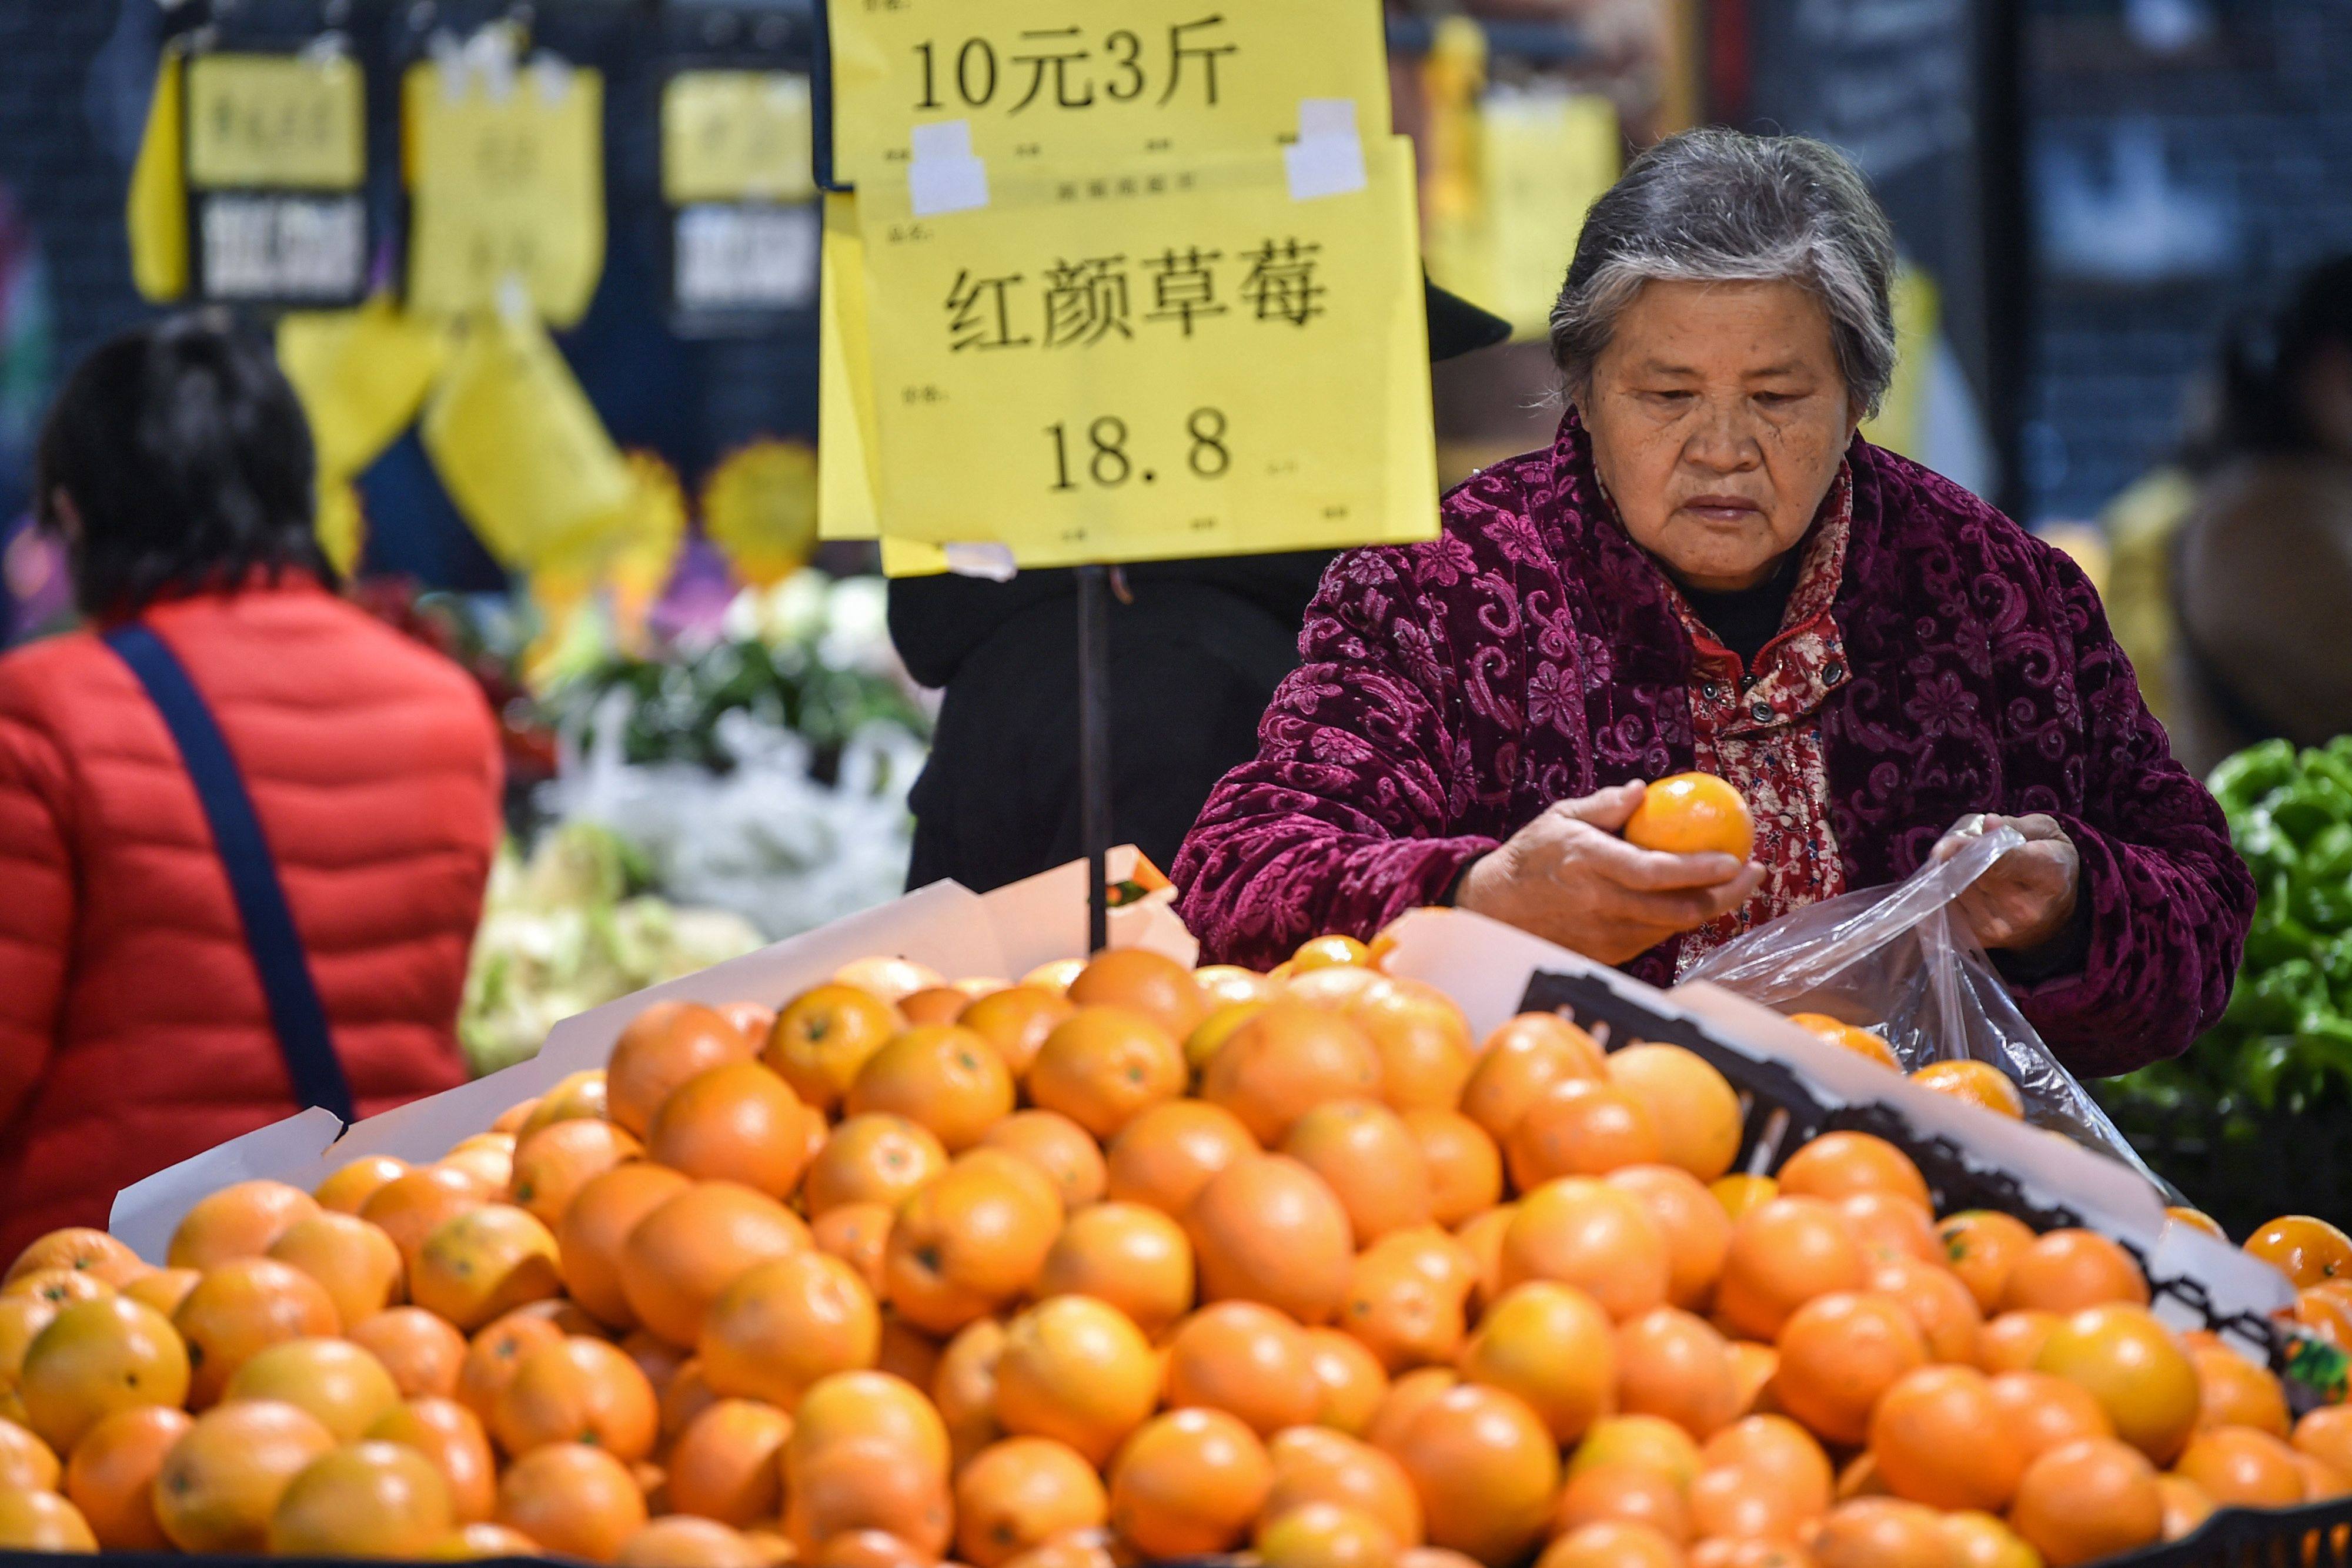 China’s consumer price index (CPI) fell by 0.3 per cent year on year in December, the National Bureau of Statistics said on Friday. Photo: AFP